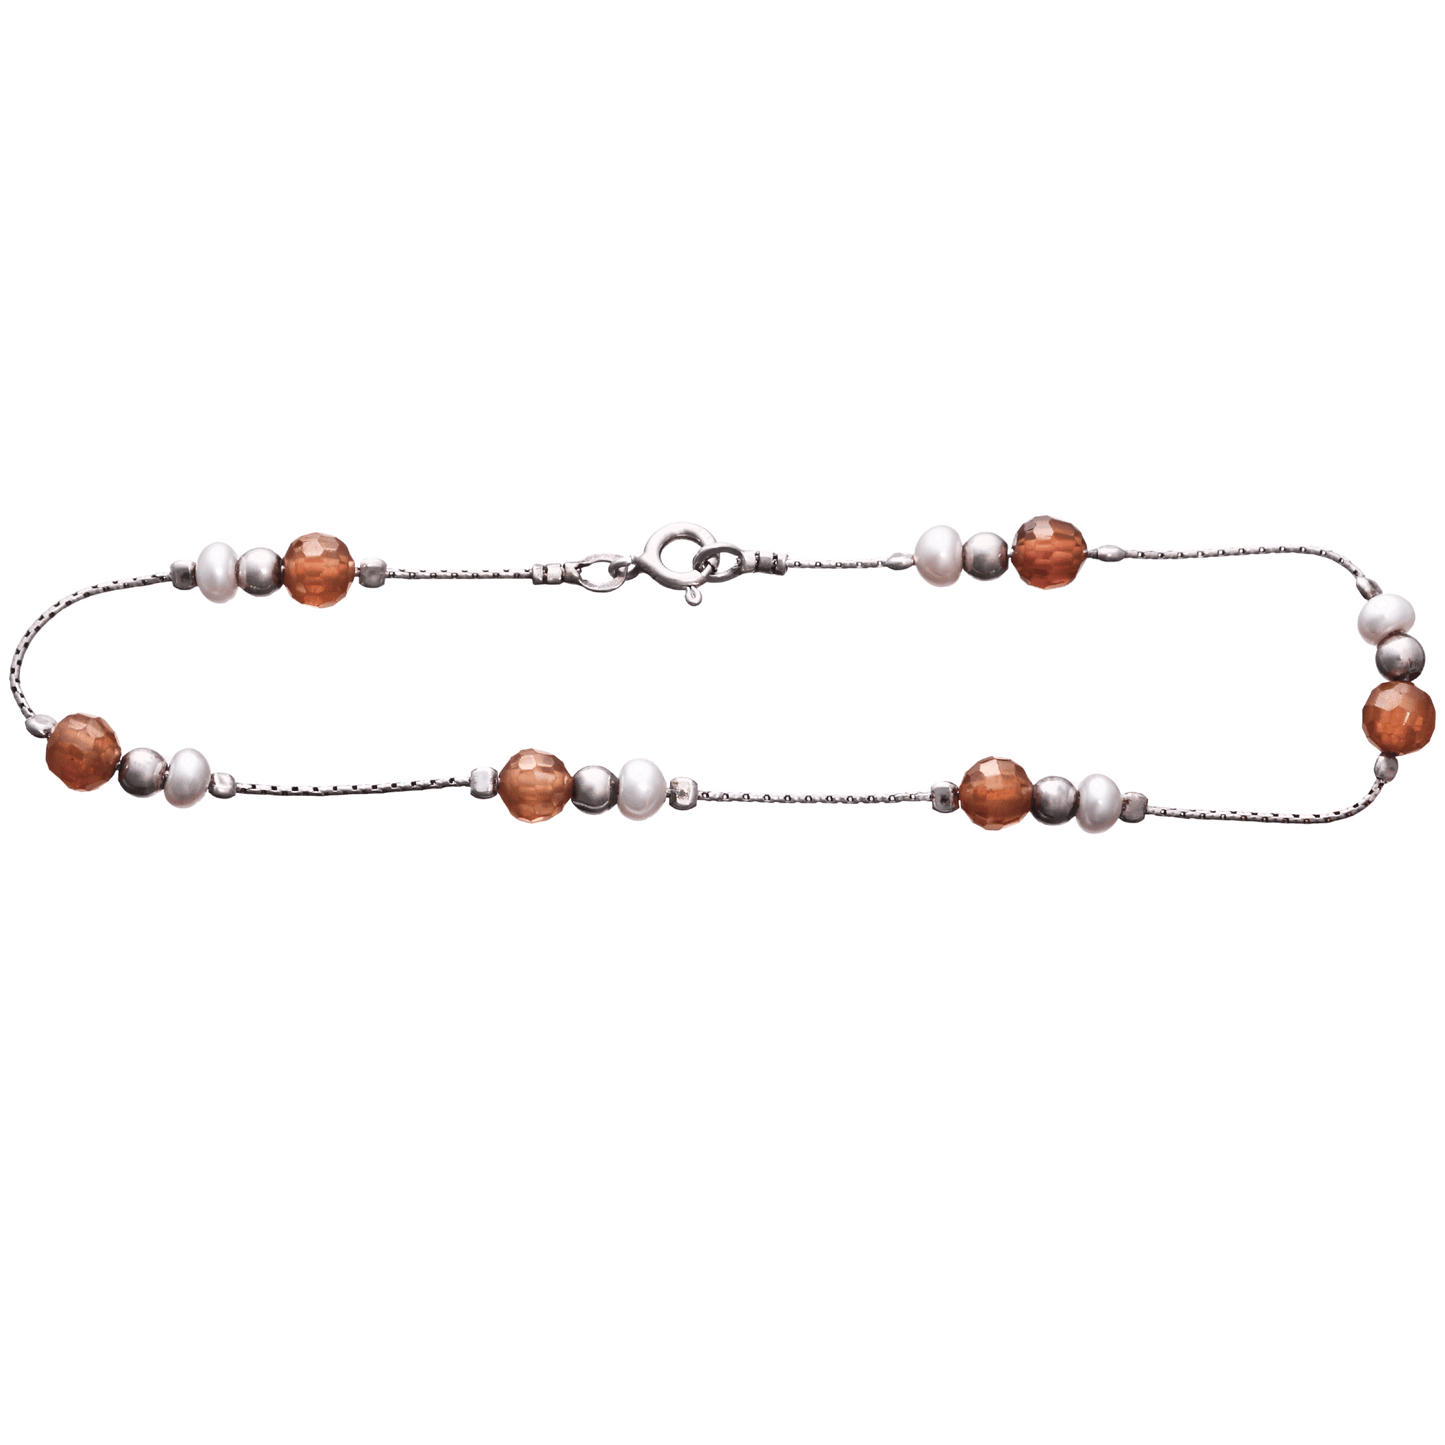 Sterling silver anklet with orange coral stone, pearl, and sterling silver beads